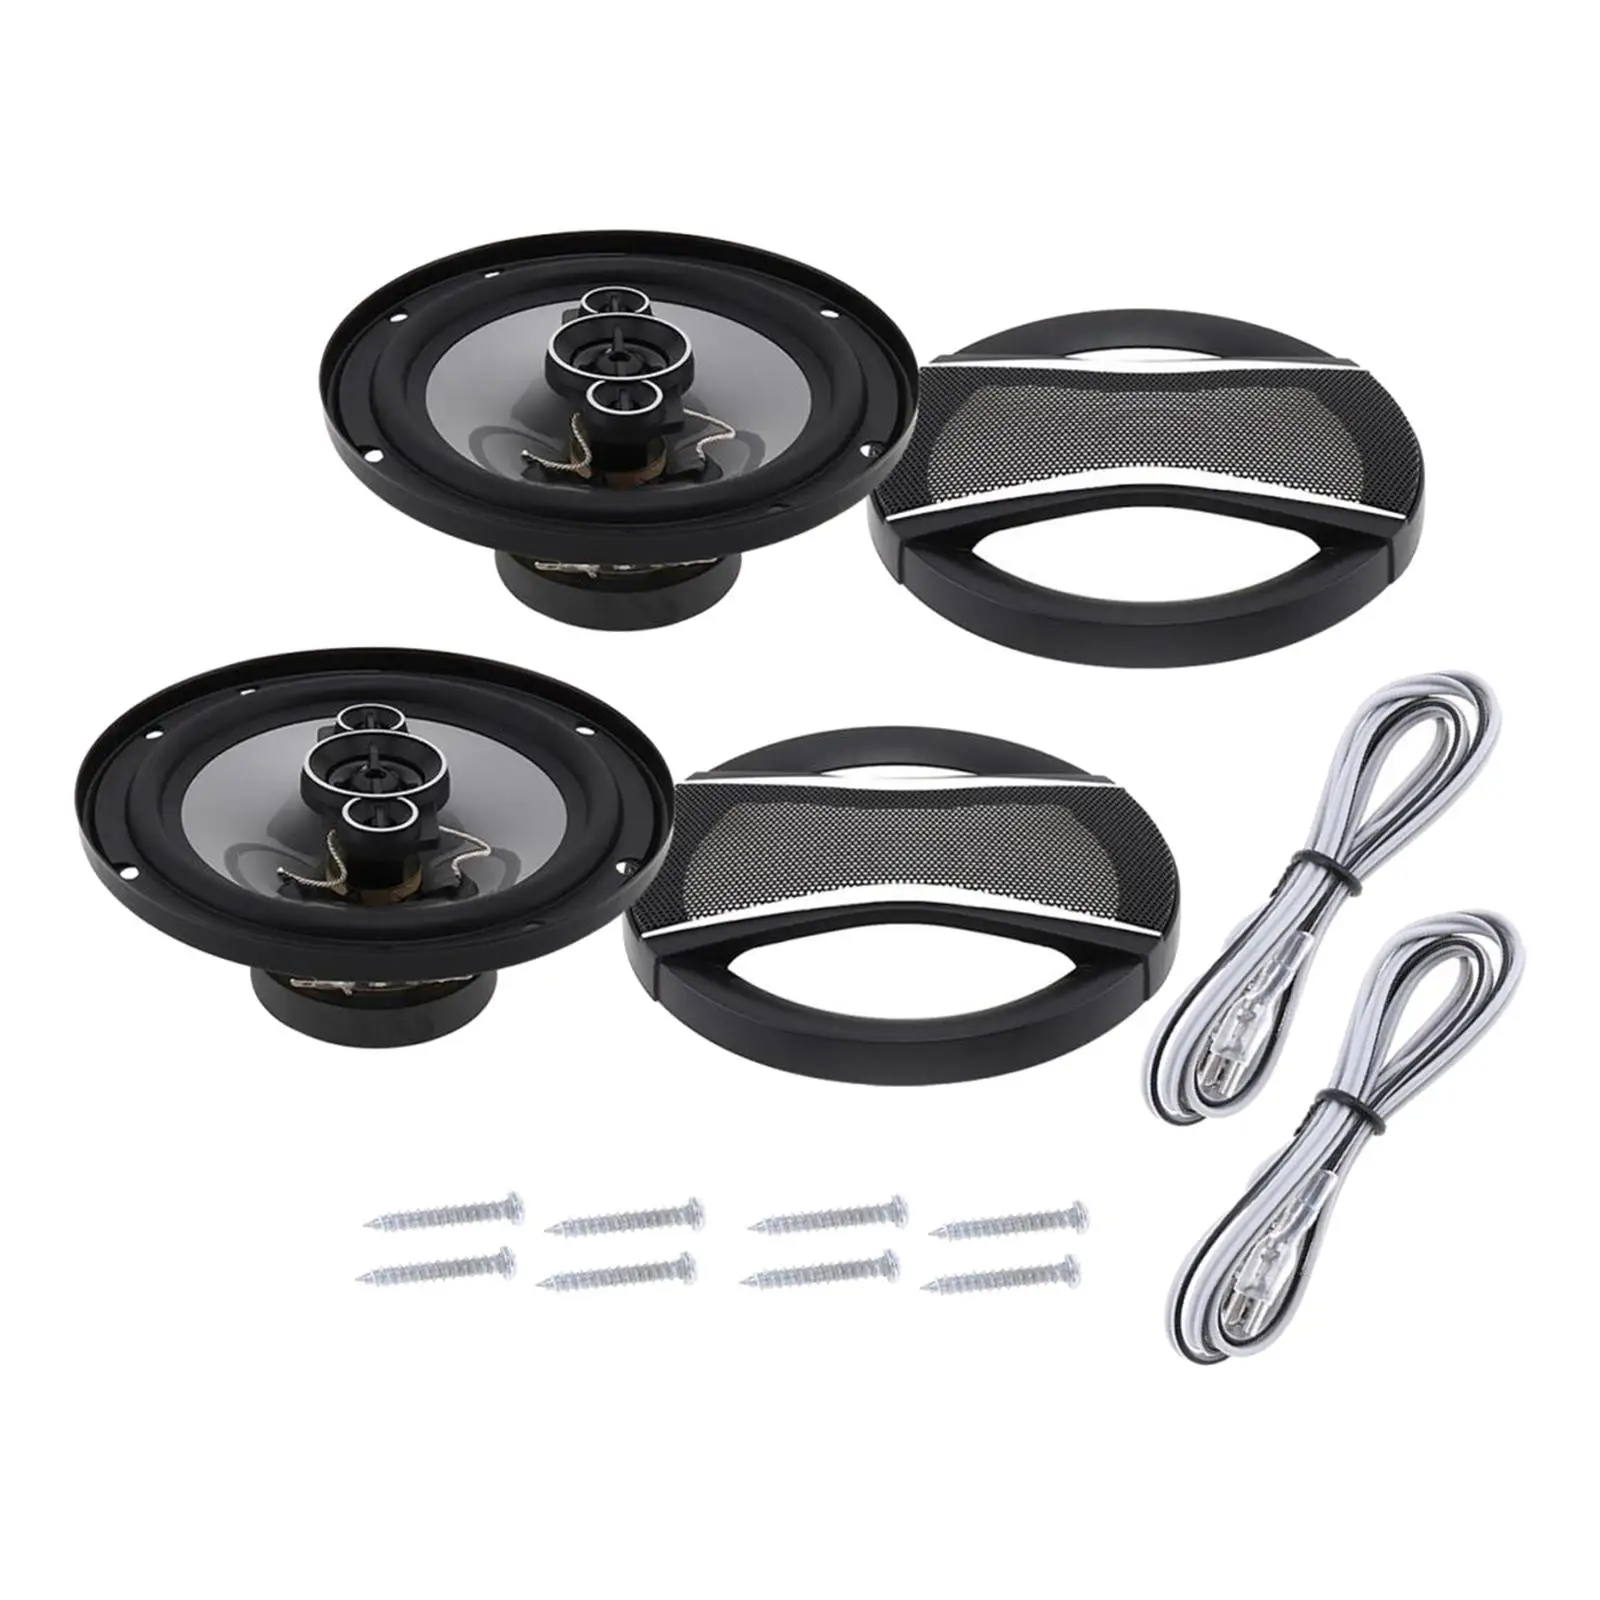 2 Pcs Car HiFi Coaxial Speaker Component Full Range Frequency Vehicle Speaker for Vehicle